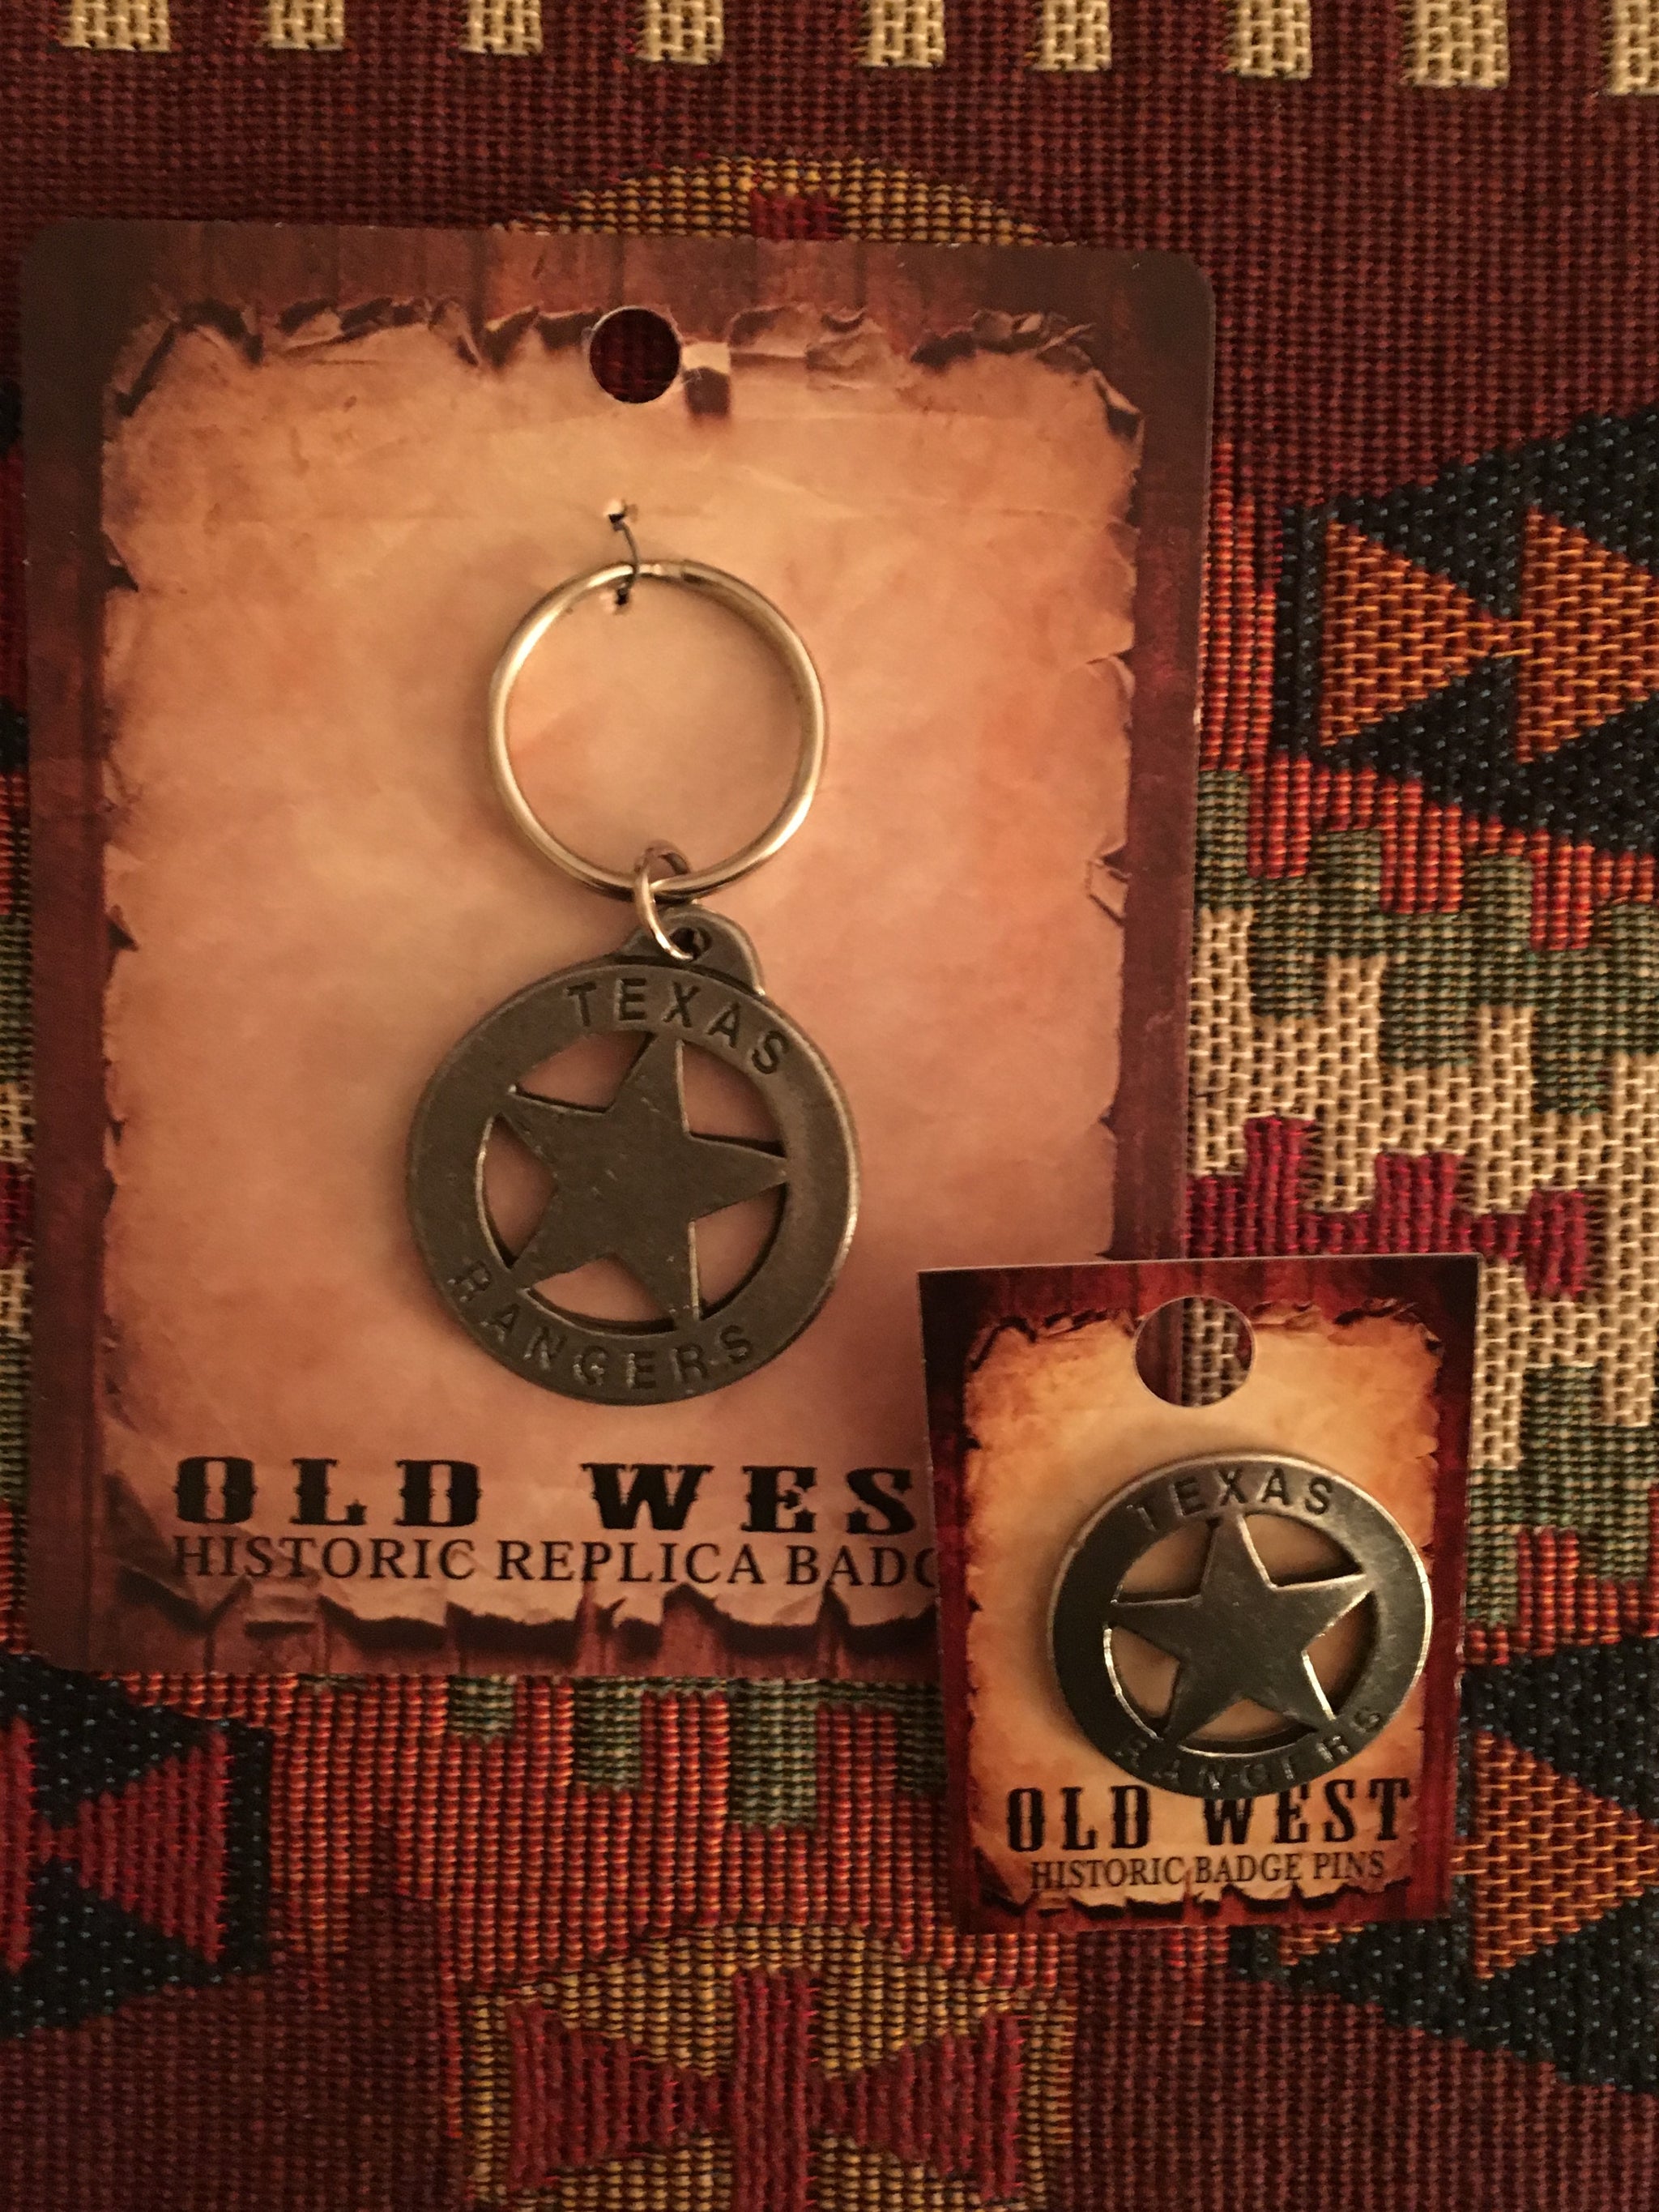 Old West Historic Replica Badge: Texas Rangers Star - OutWest Shop